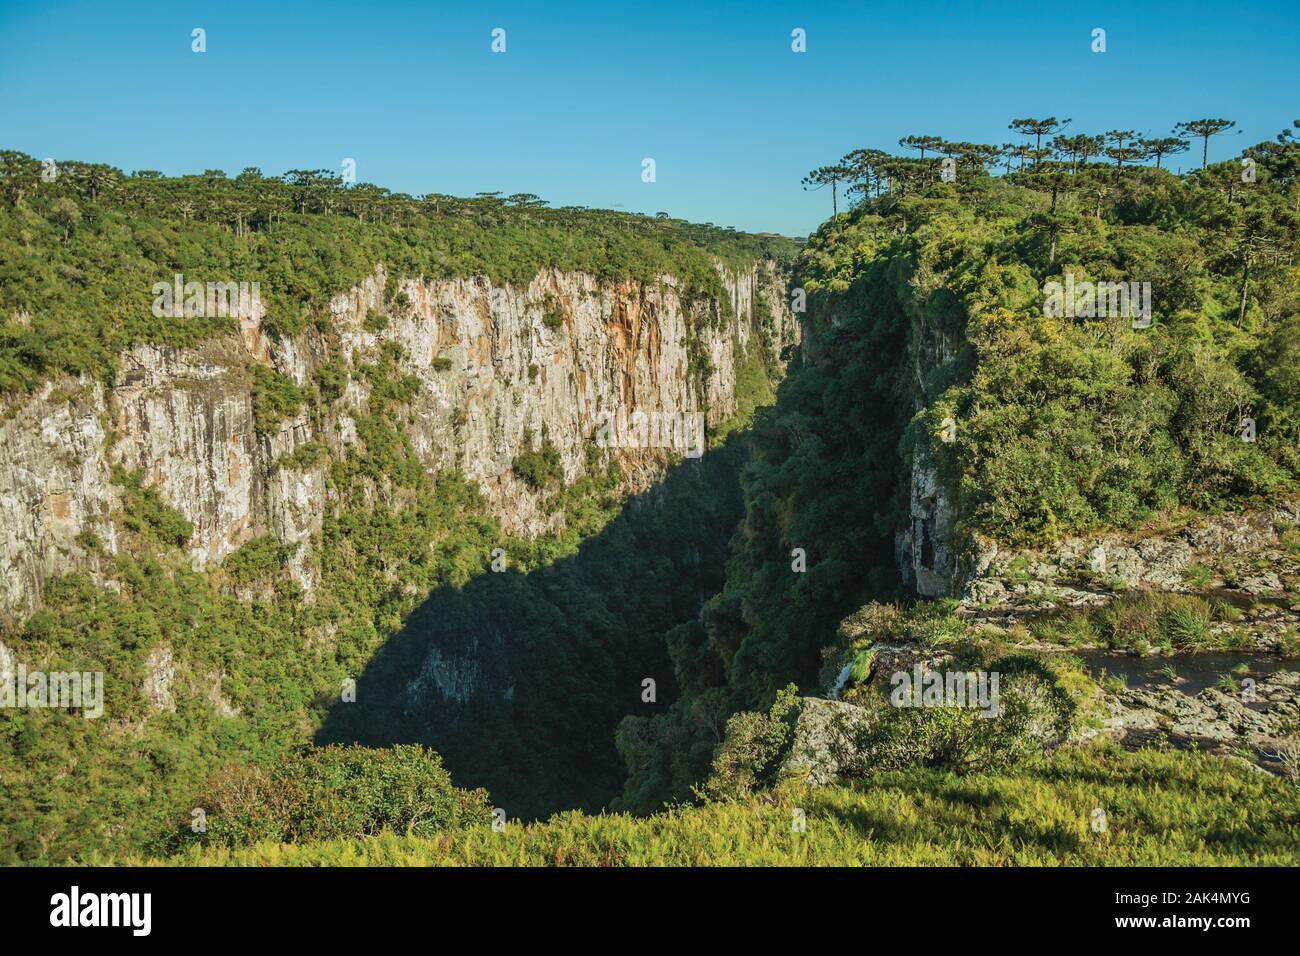 Itaimbezinho Canyon with steep rocky cliffs covered by forest near Cambara do Sul. A town with natural tourist sights in southern Brazil. Stock Photo